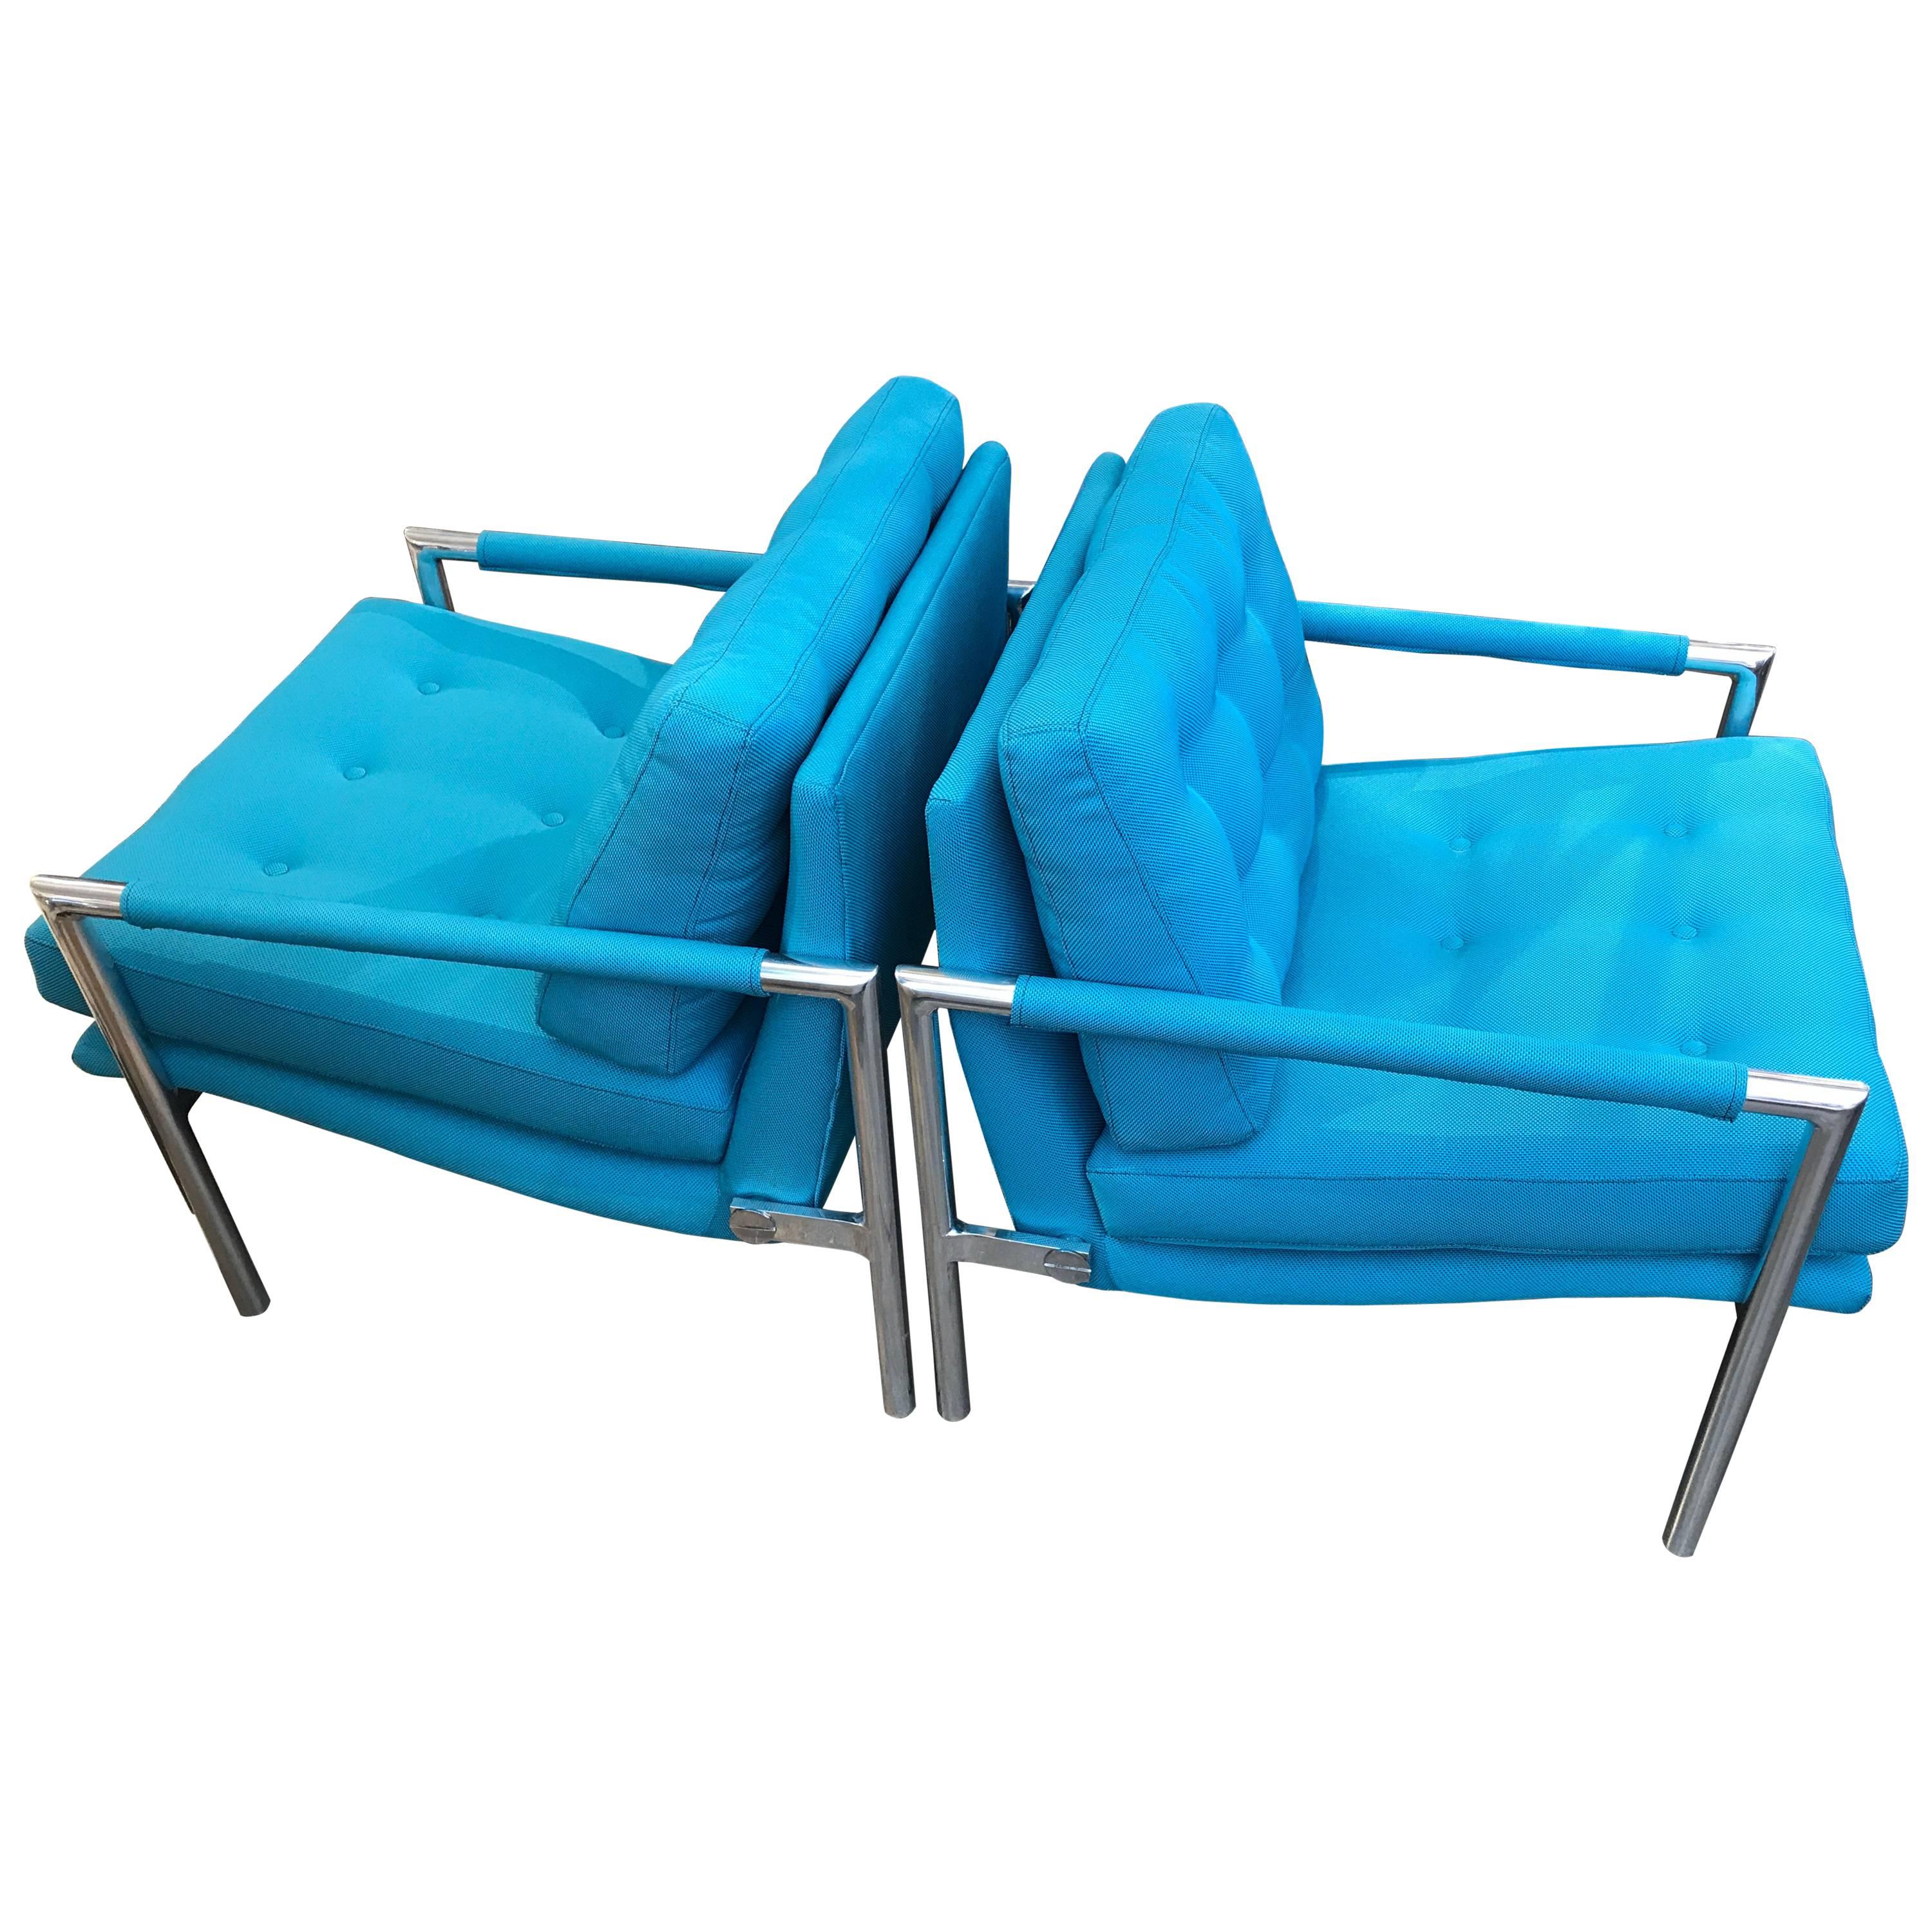 Pair of Aluminium Lounge Chairs in the Manner of Harvey Probber